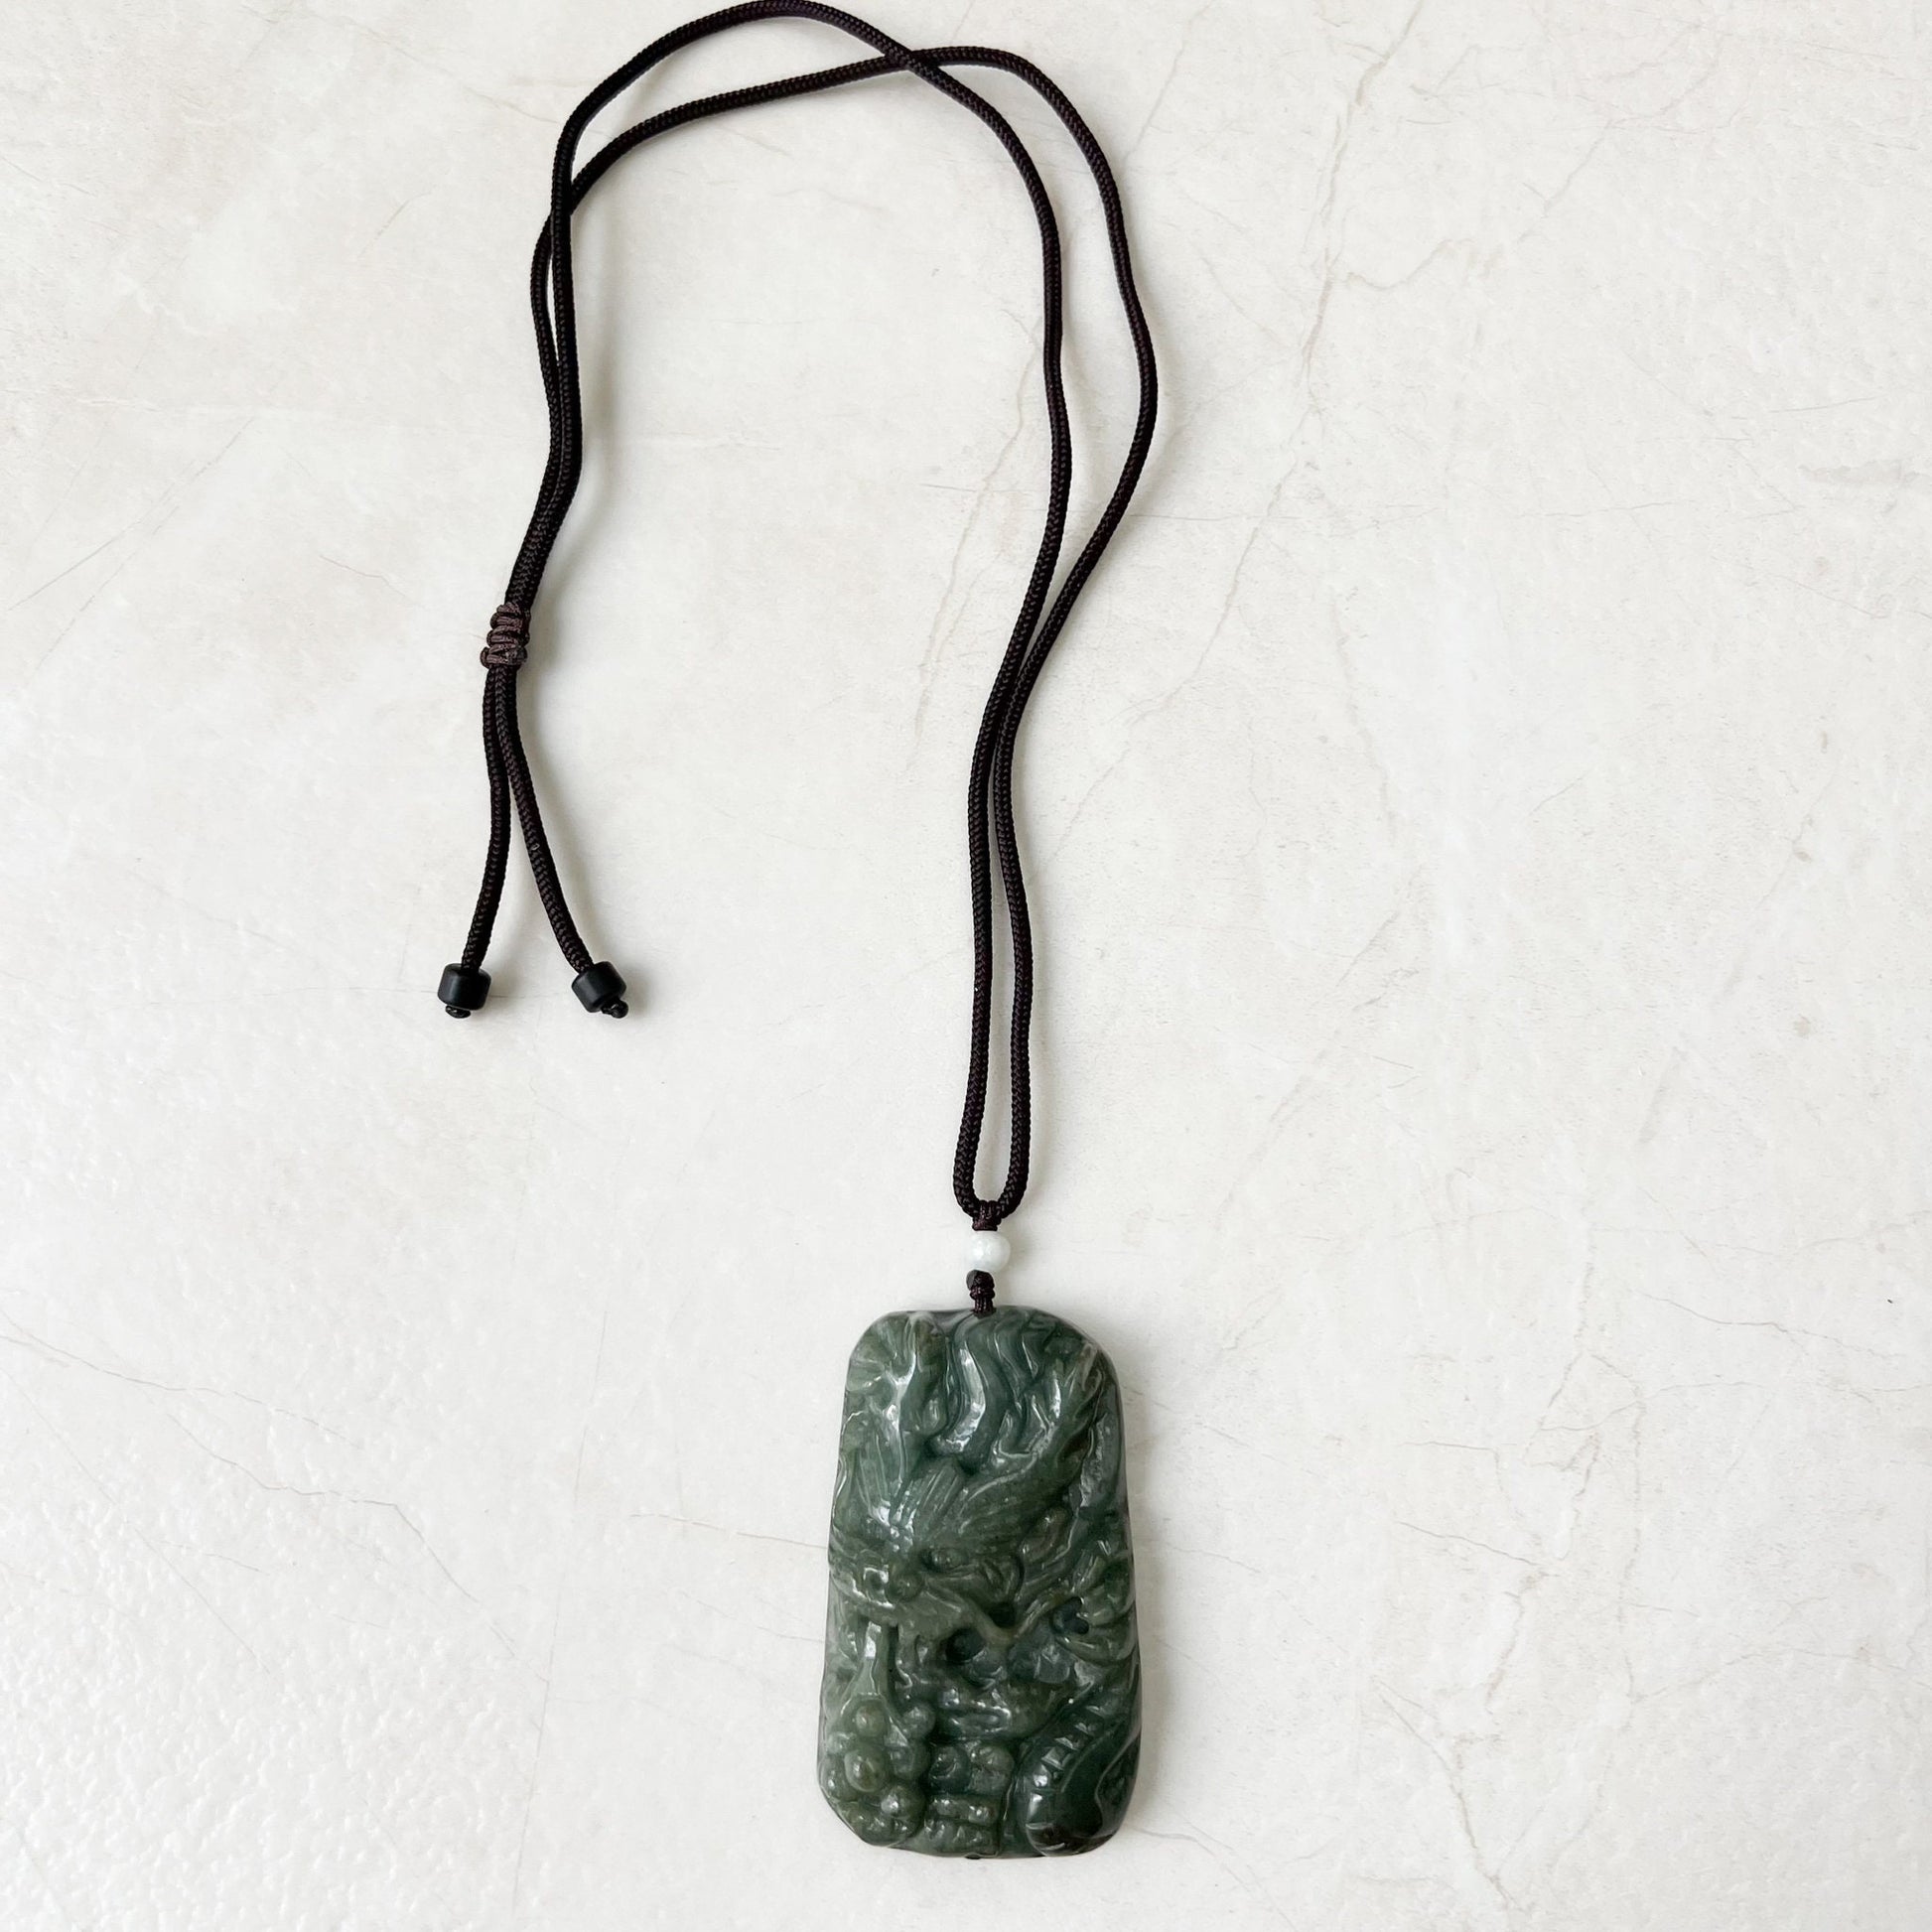 Large Jadeite Green Jade Dragon Chinese Zodiac Hand Carved Pendant Necklace, YJ-0322-0355301 - AriaDesignCollection